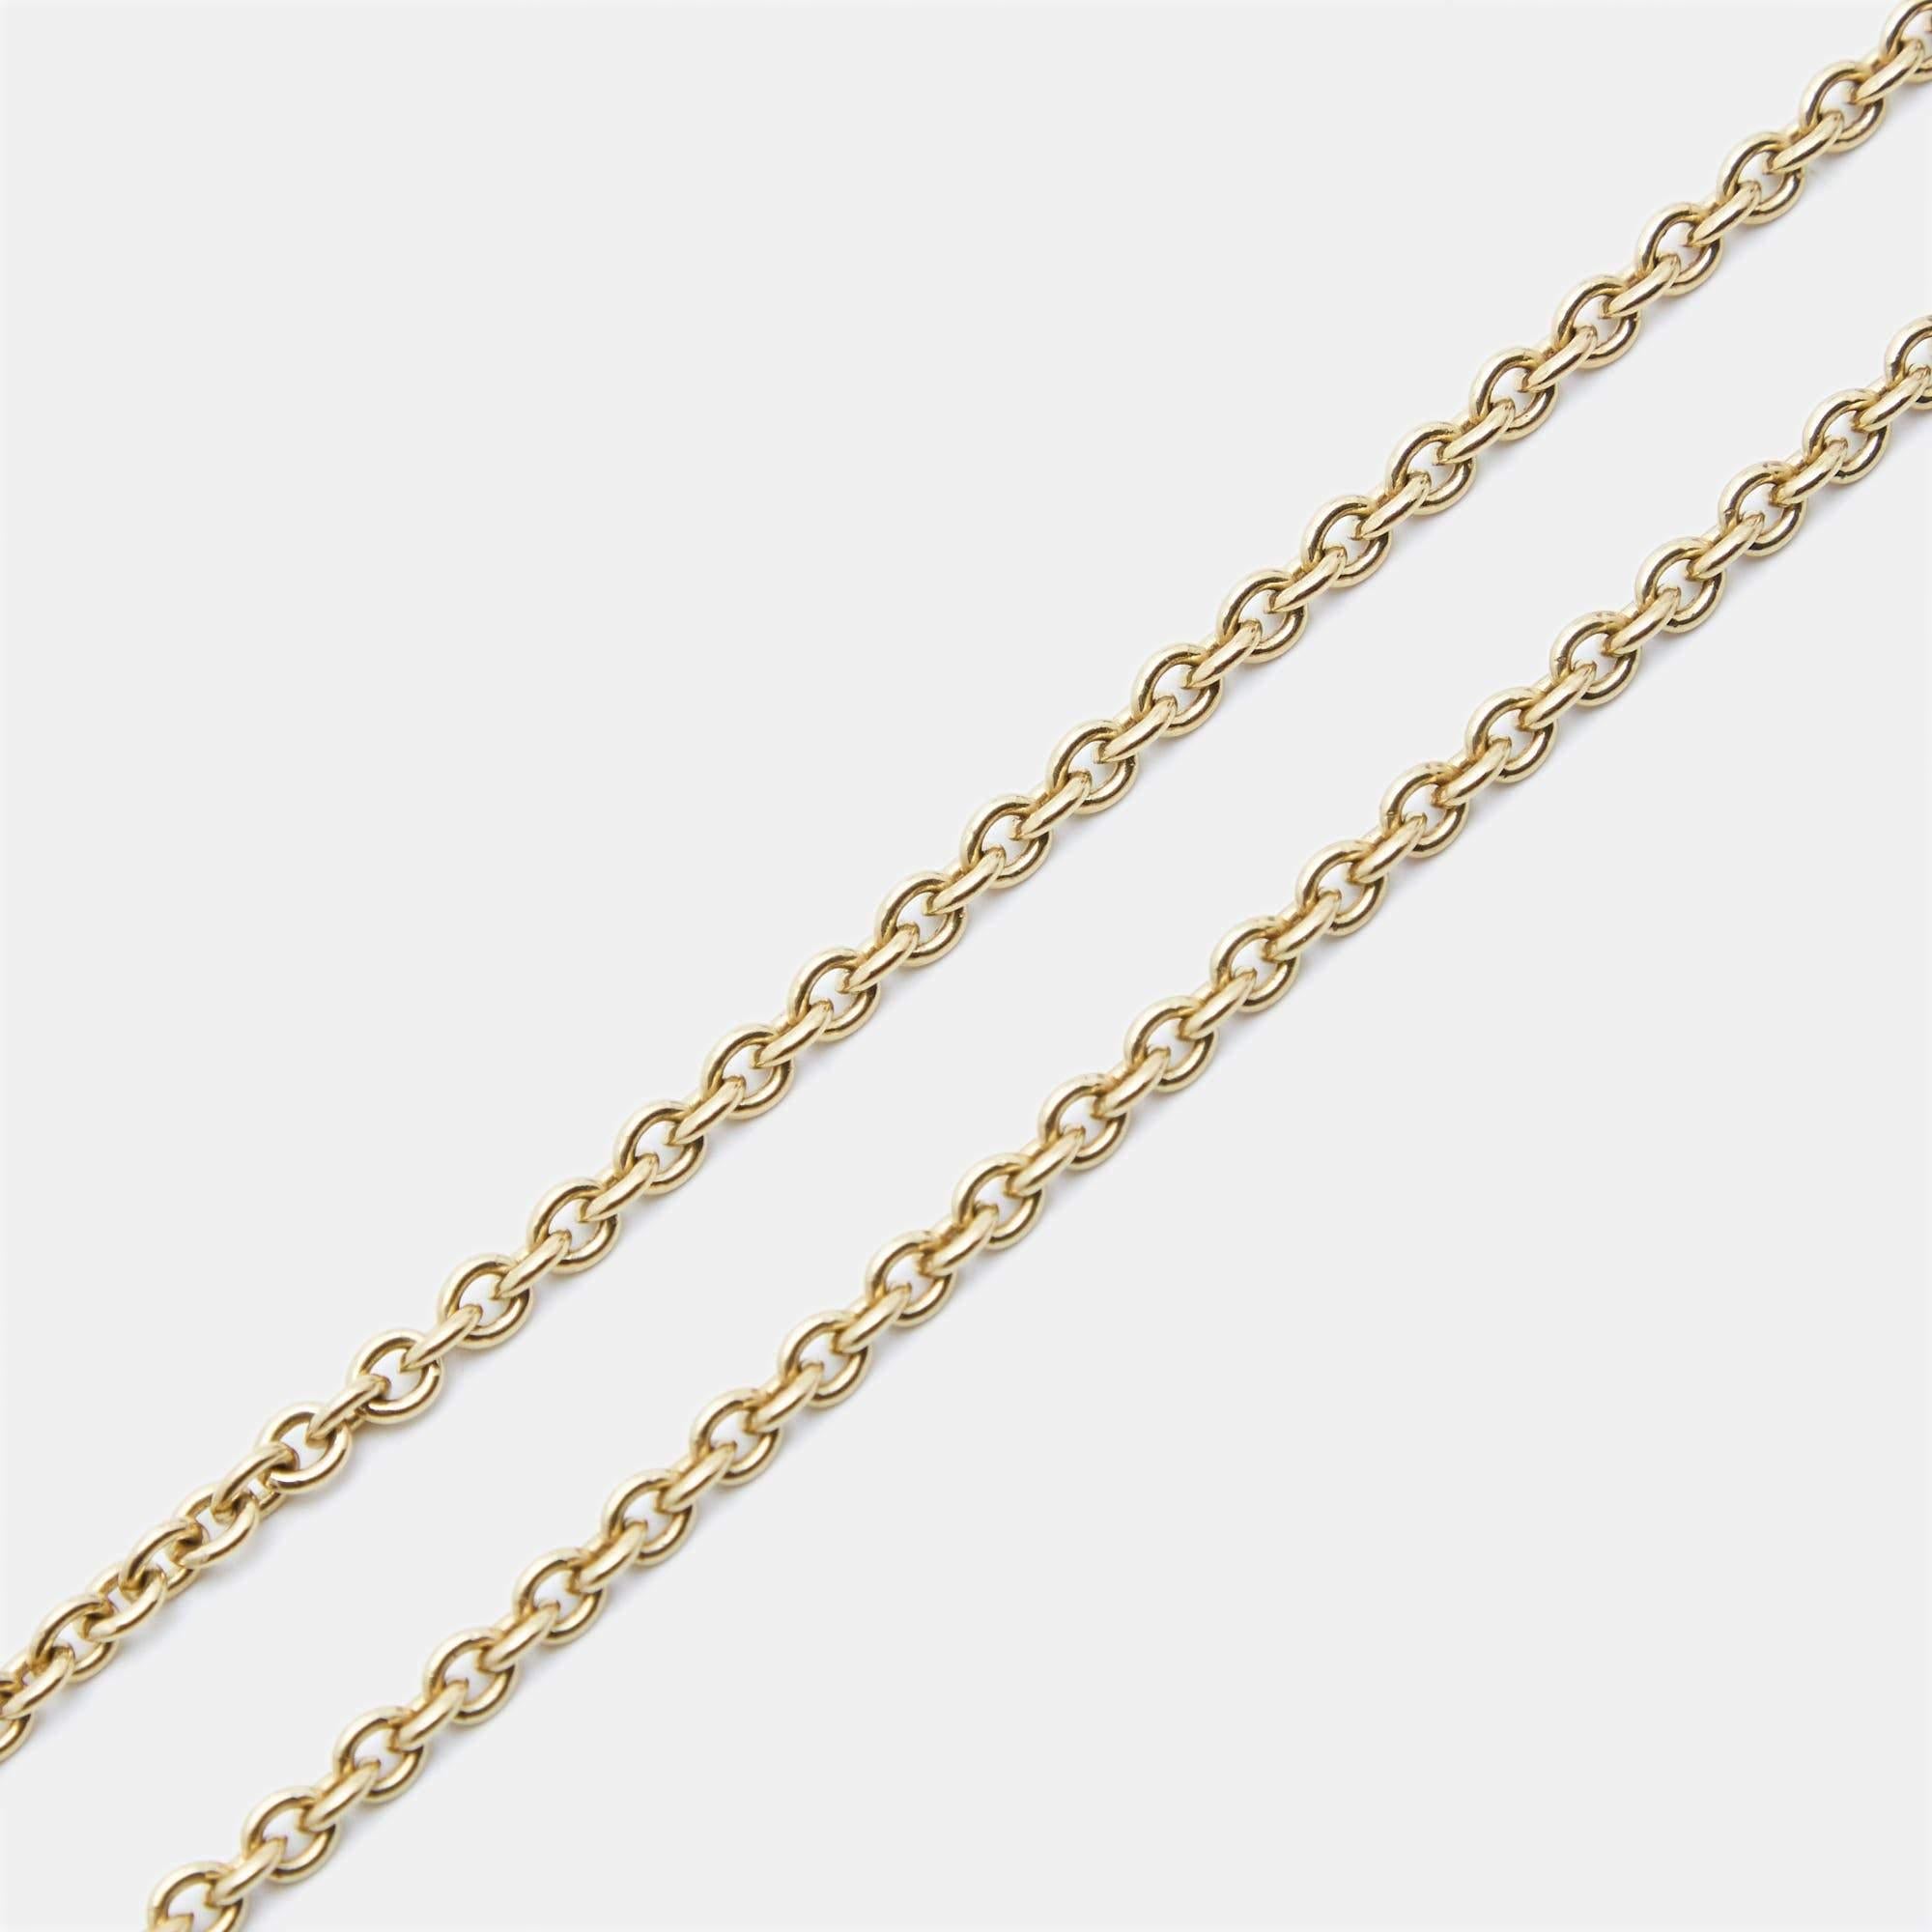 The Bvlgari Catene necklace exudes timeless elegance. Crafted with precision, this exquisite piece features a delicately intertwined chain in radiant 18k yellow gold. The luxurious design seamlessly blends modern sophistication with classic allure,